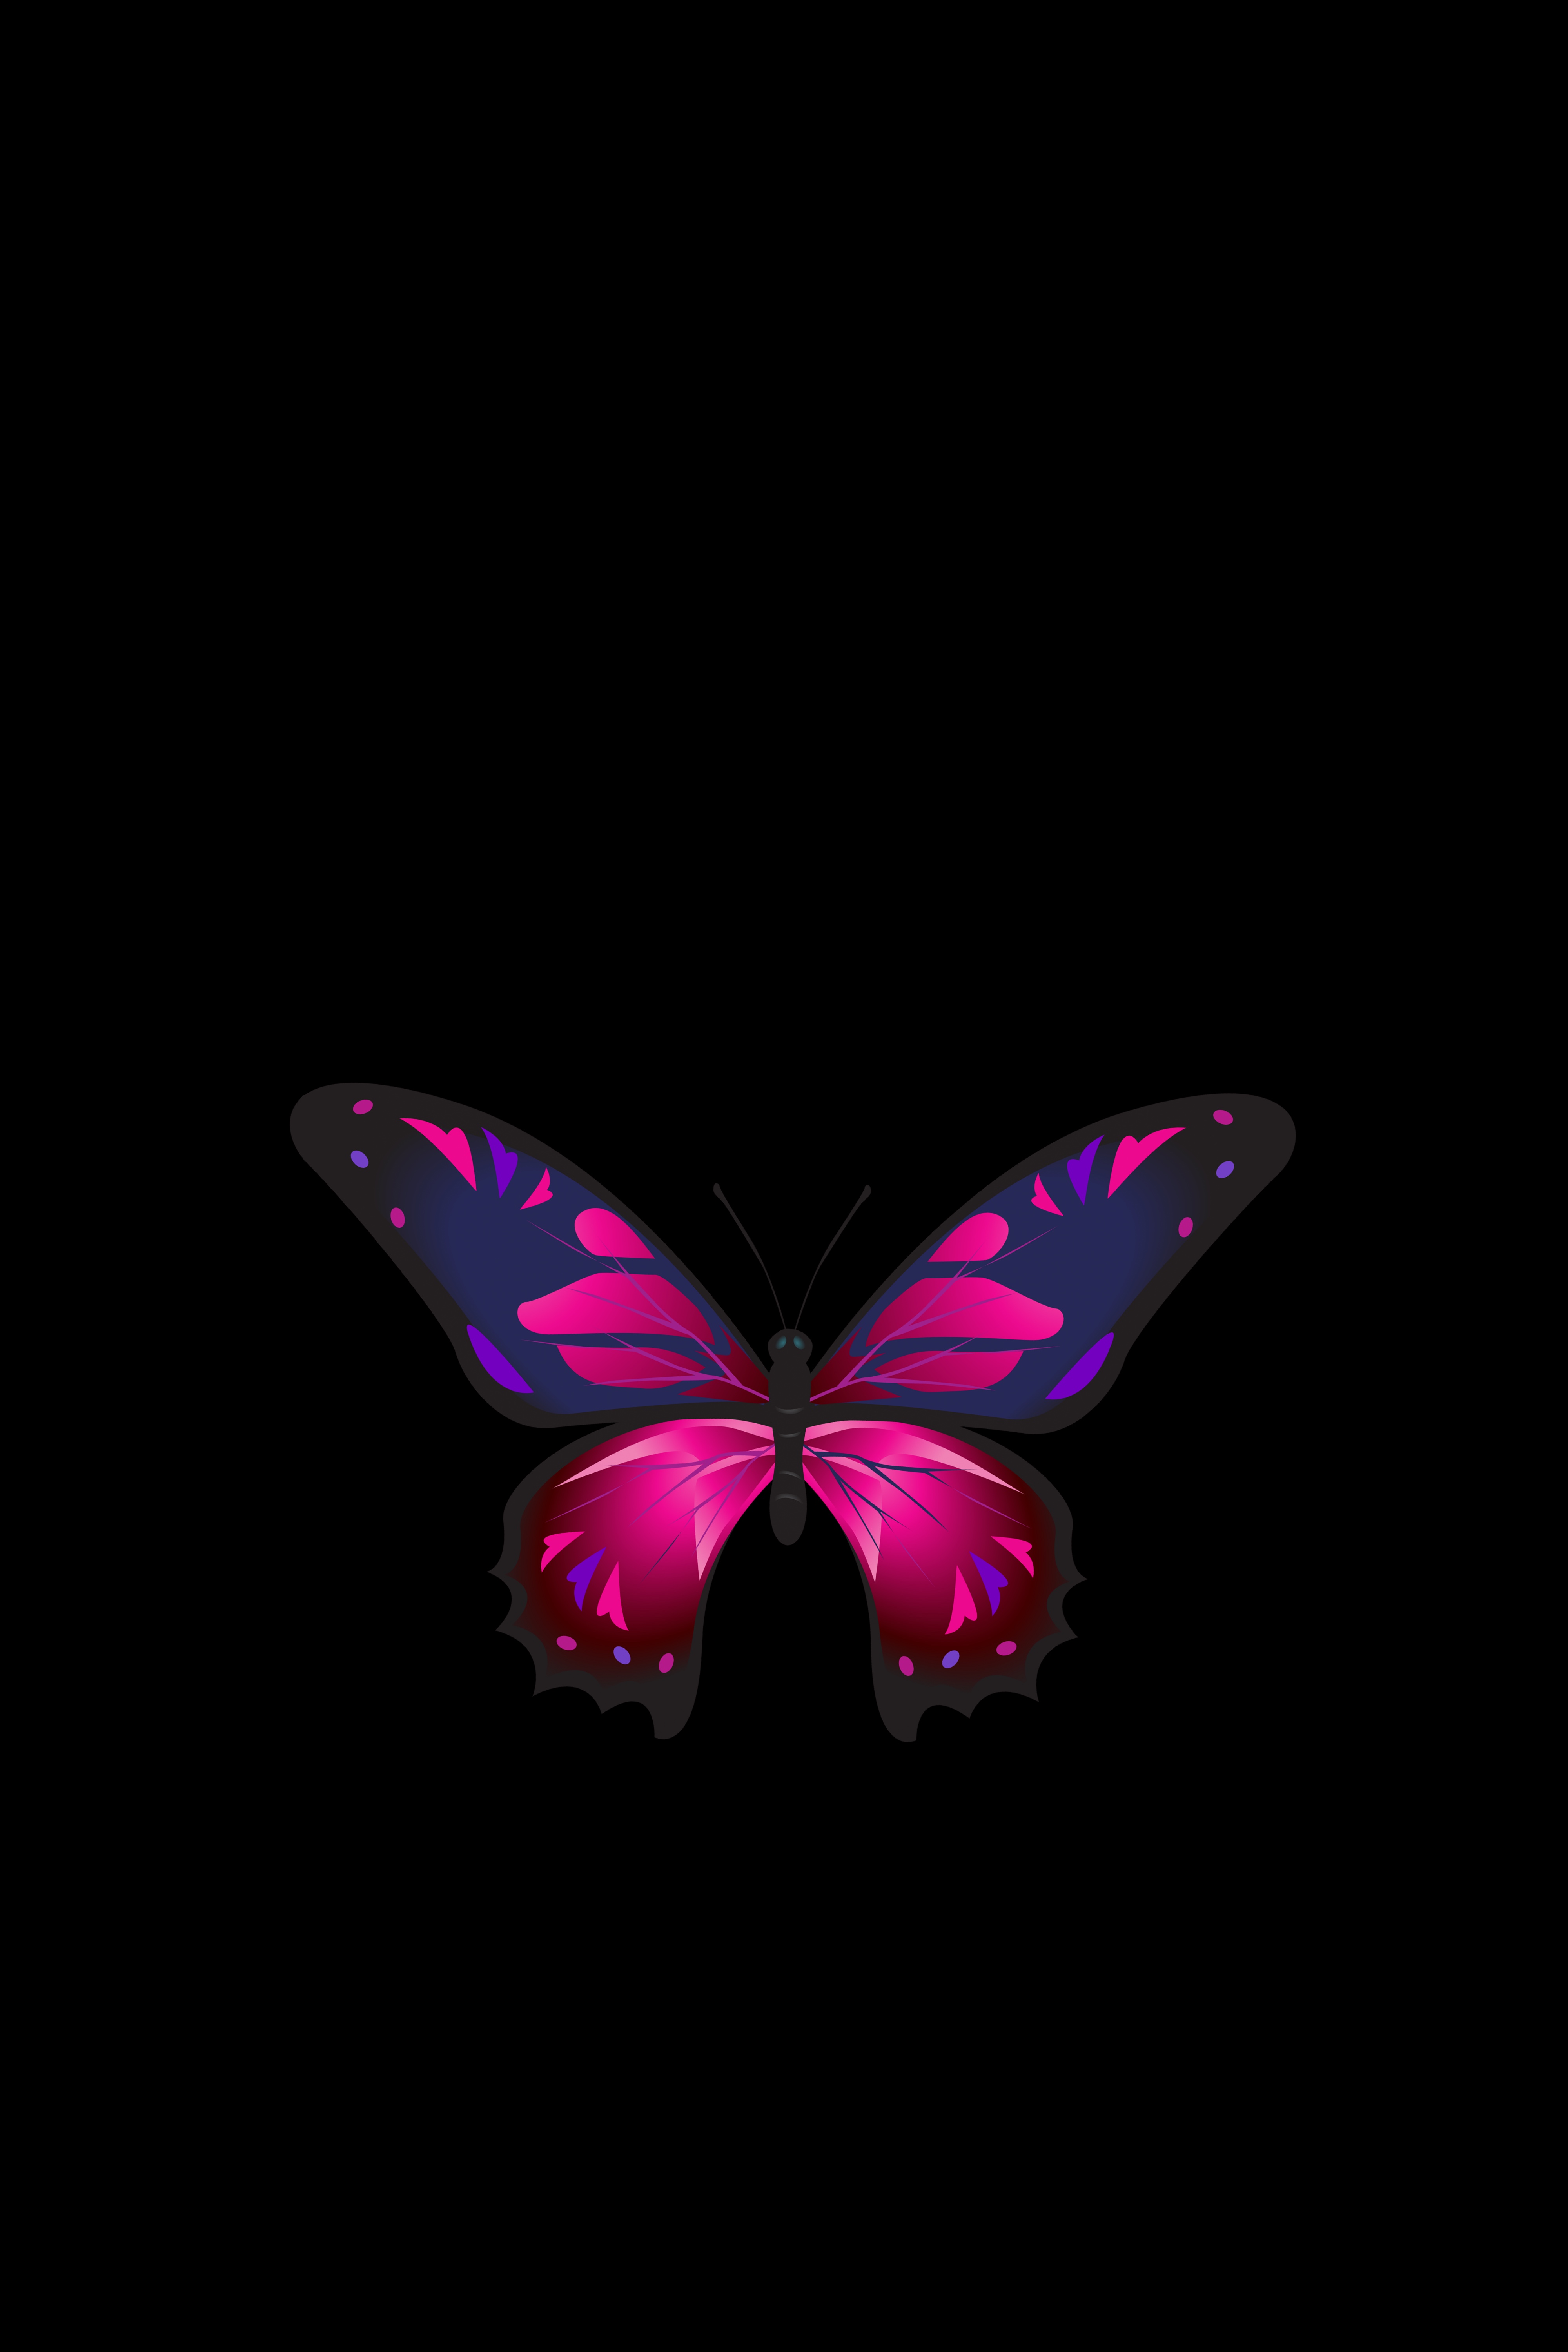 Mobile wallpaper: Wings, Patterns, Butterfly, Dark, Dark Background, 131801  download the picture for free.